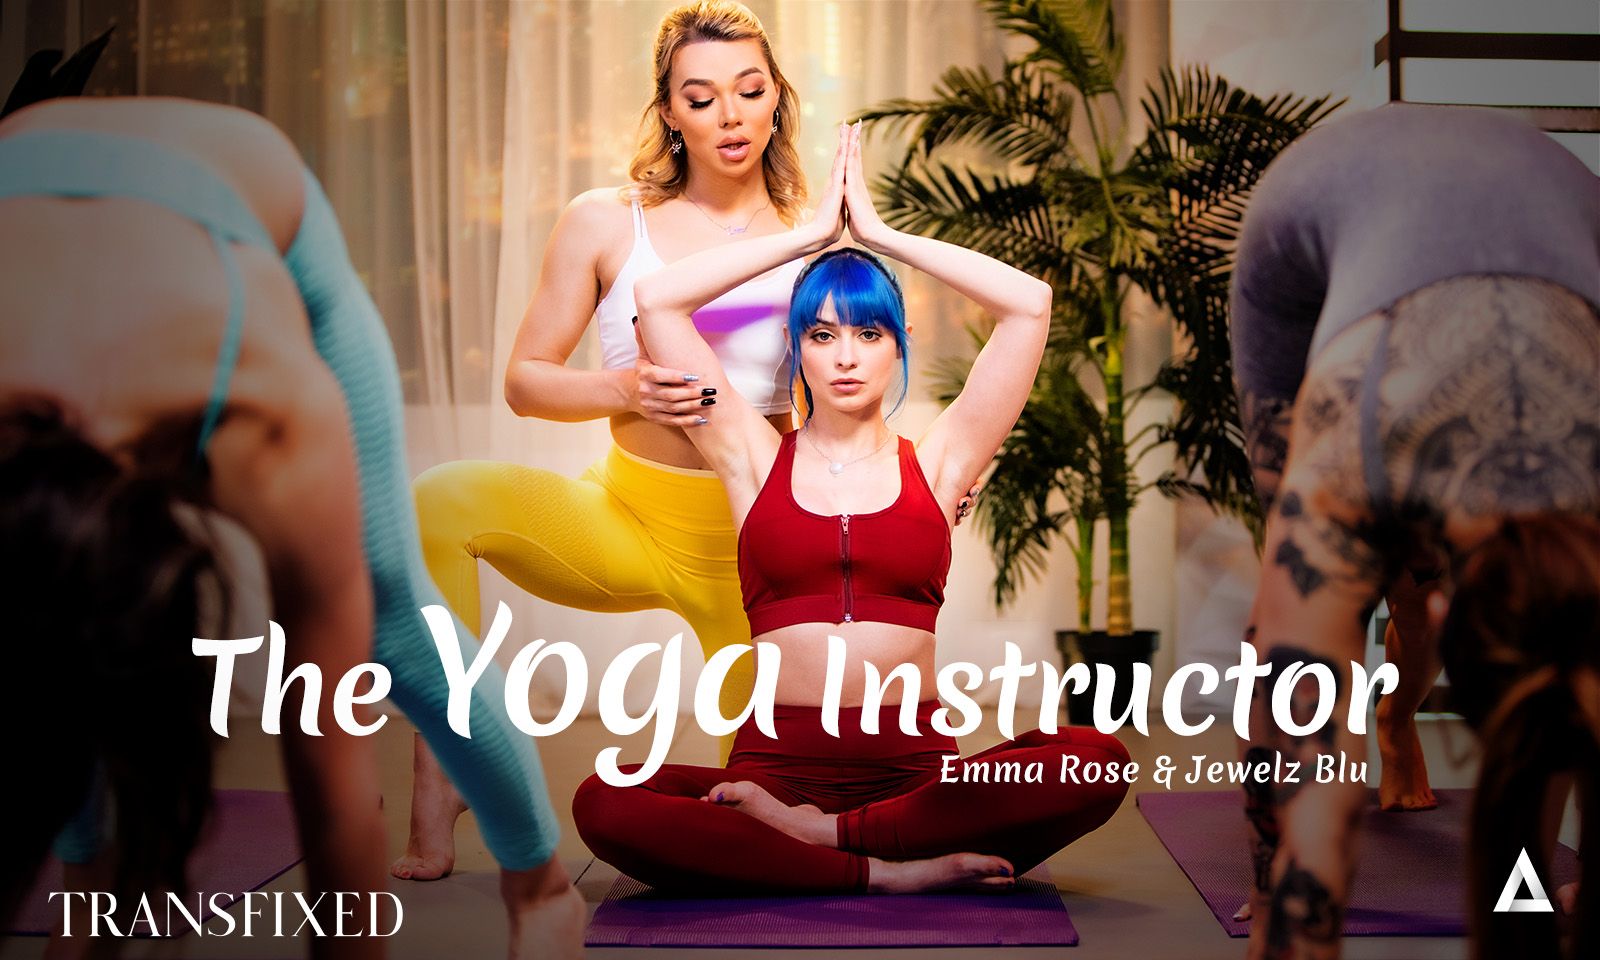 Emma Rose Is 'The Yoga Instructor' in New Transfixed Title